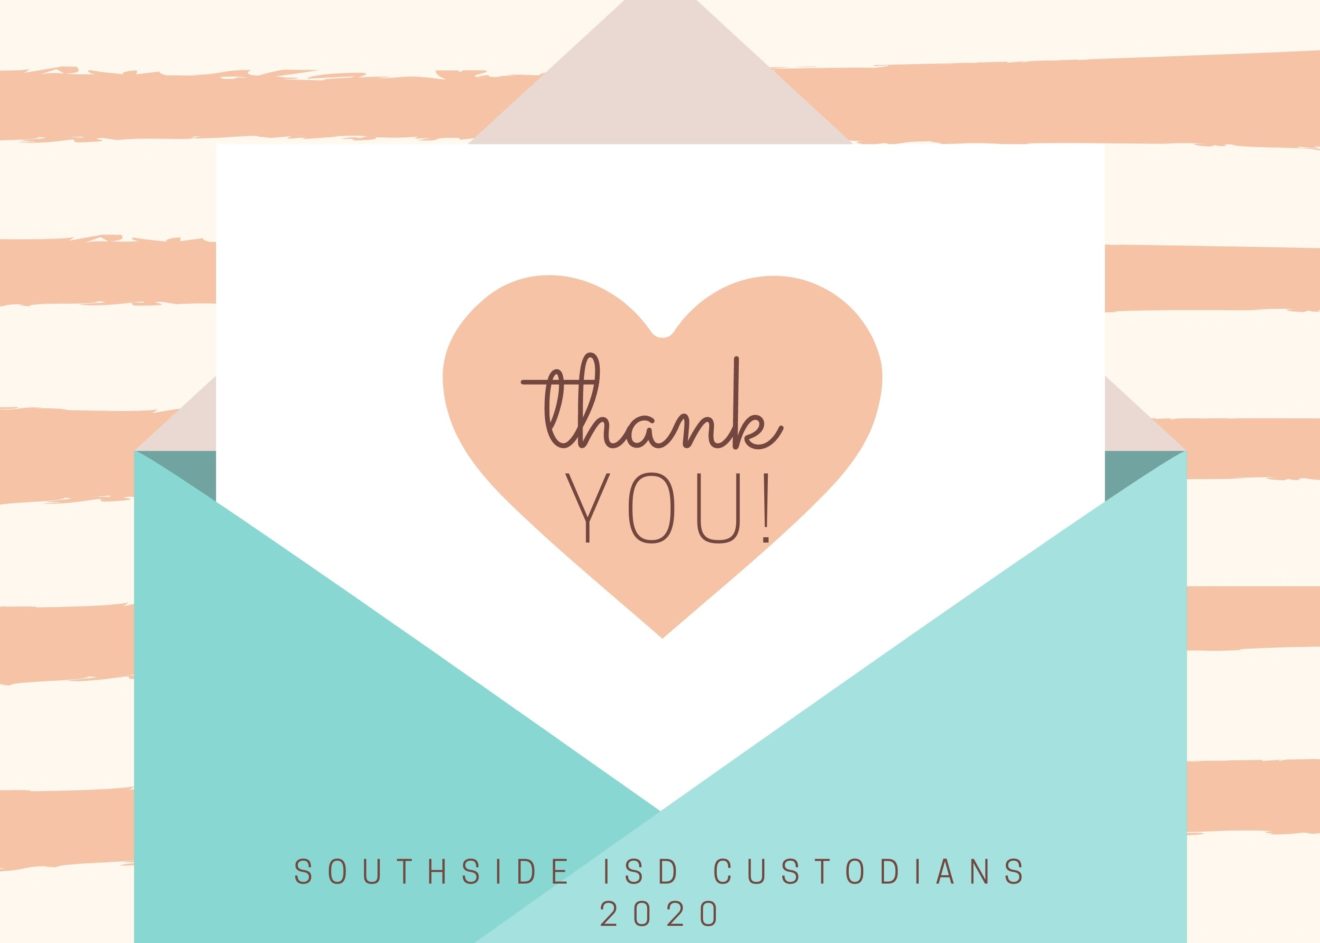 Thank you to ALL the SOUTHSIDE ISD Custodians!